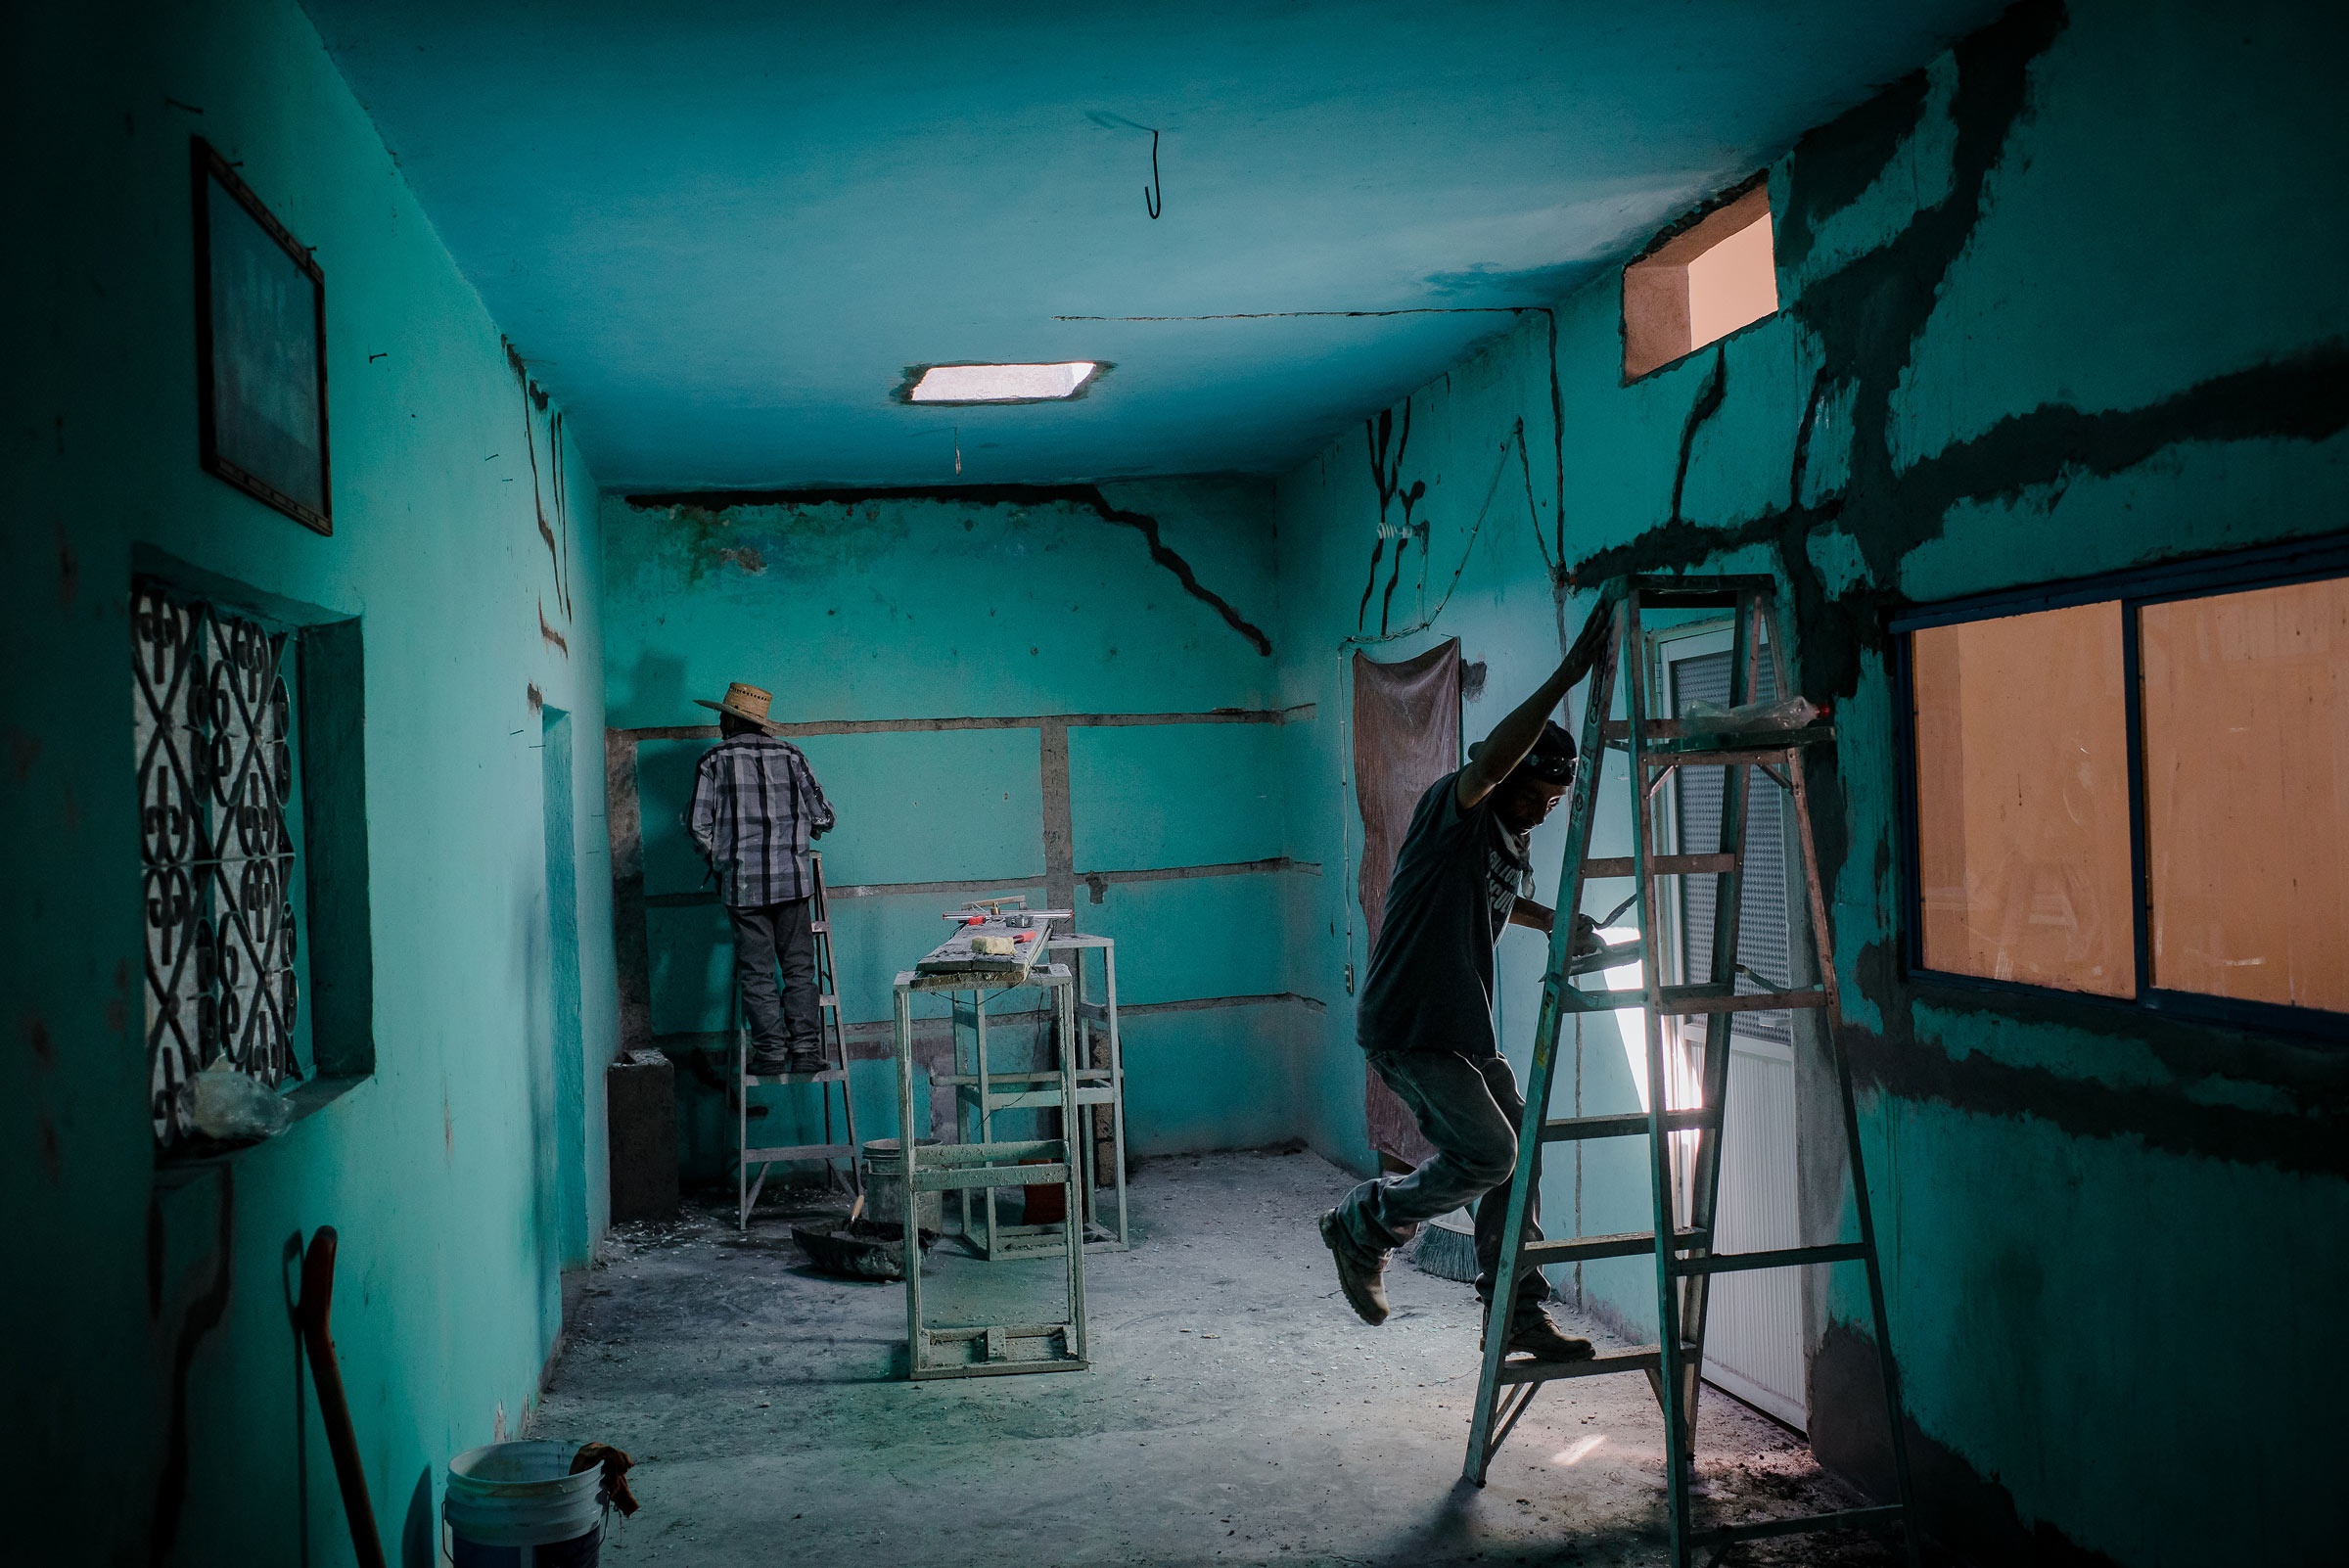 Two men doing construction repairs inside a room with blue walls